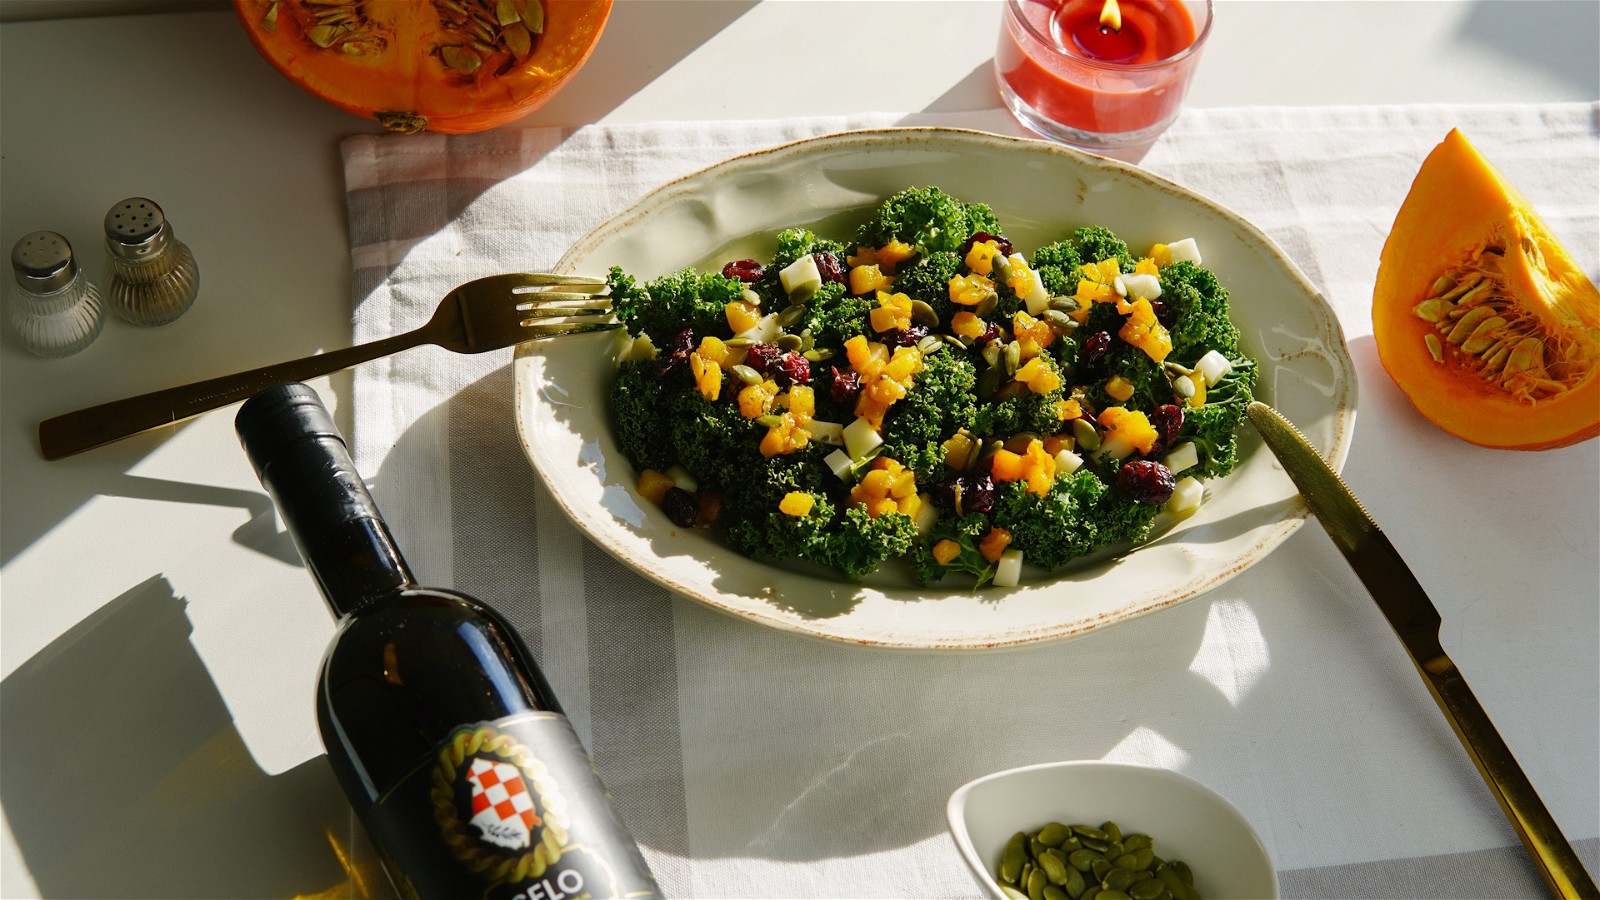 Image of Harvest Salad with Roasted Butternut Squash and Kale